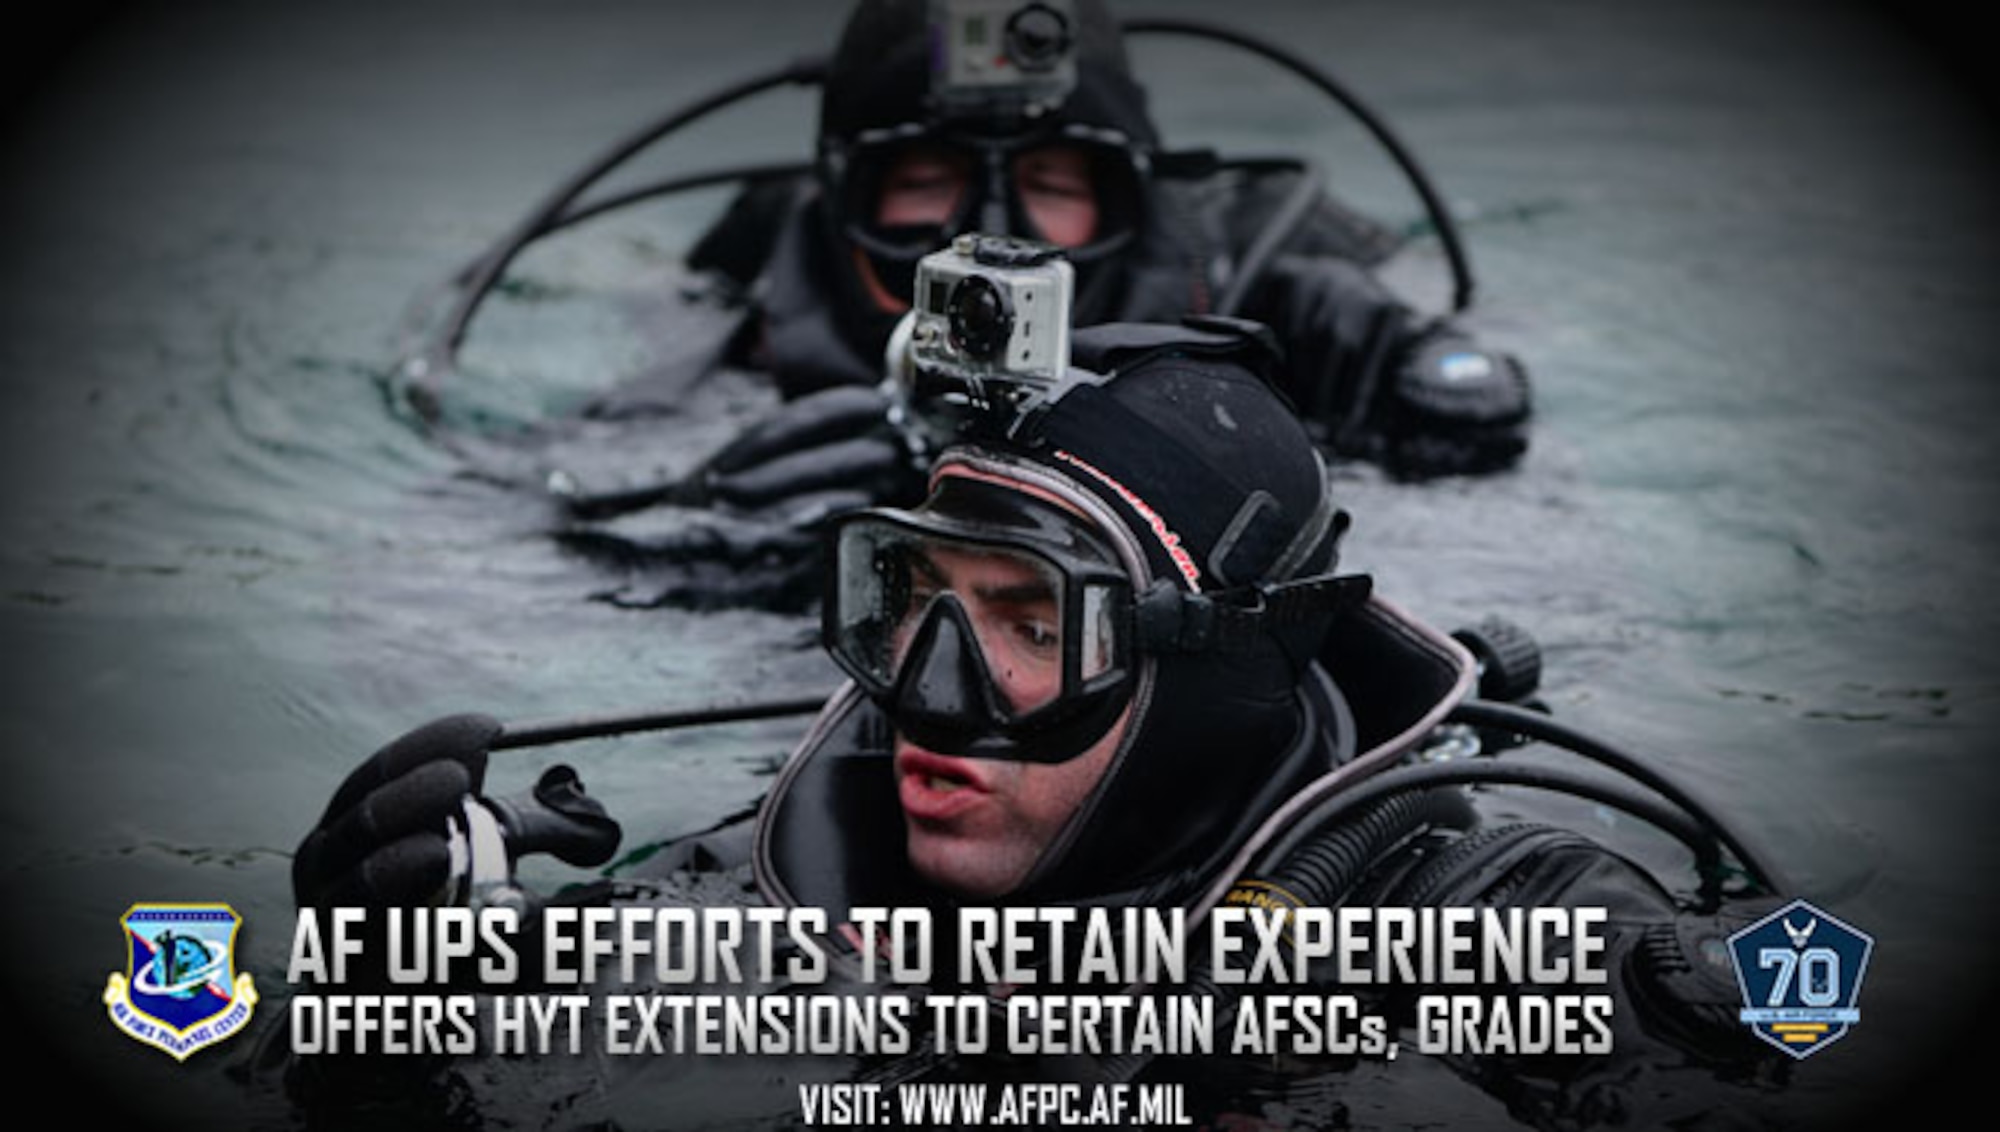 High year of tenure extensions are available starting Aug. 1 to Airmen in shortage specialties and grades, such as special operations, in order to retain experience and enhance mission effectiveness. Airmen must have a HYT date of Oct. 1, 2017, through Sept. 30, 2018, for program eligibility. (U.S. Air Force photo by Senior Airman Lausanne Morgan)